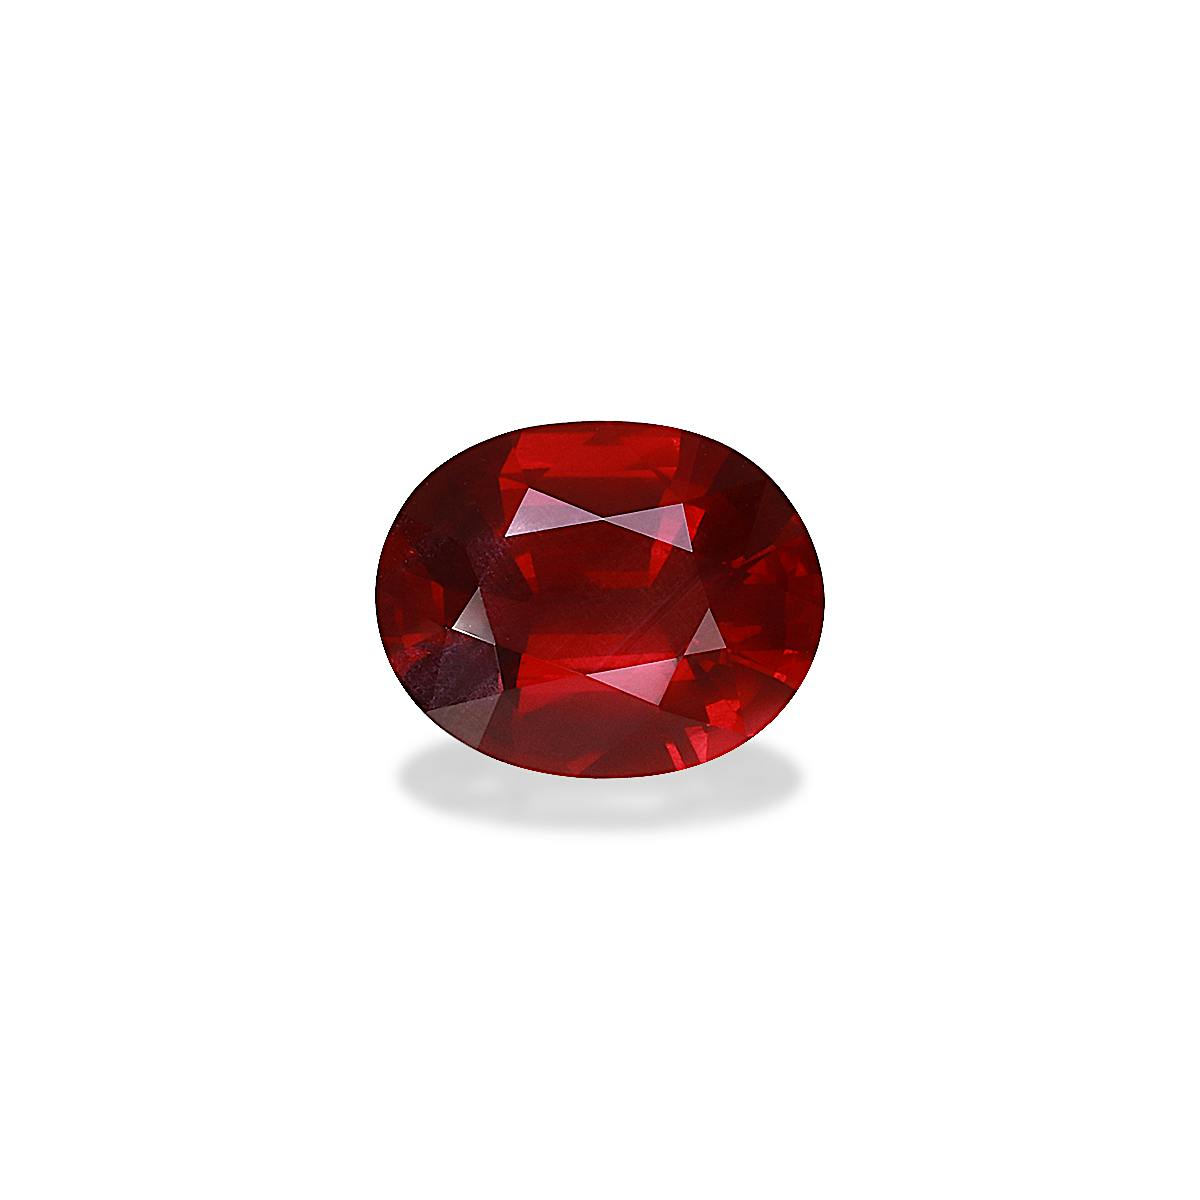 Pigeons Blood Mozambique Ruby 1.90ct - Main Image